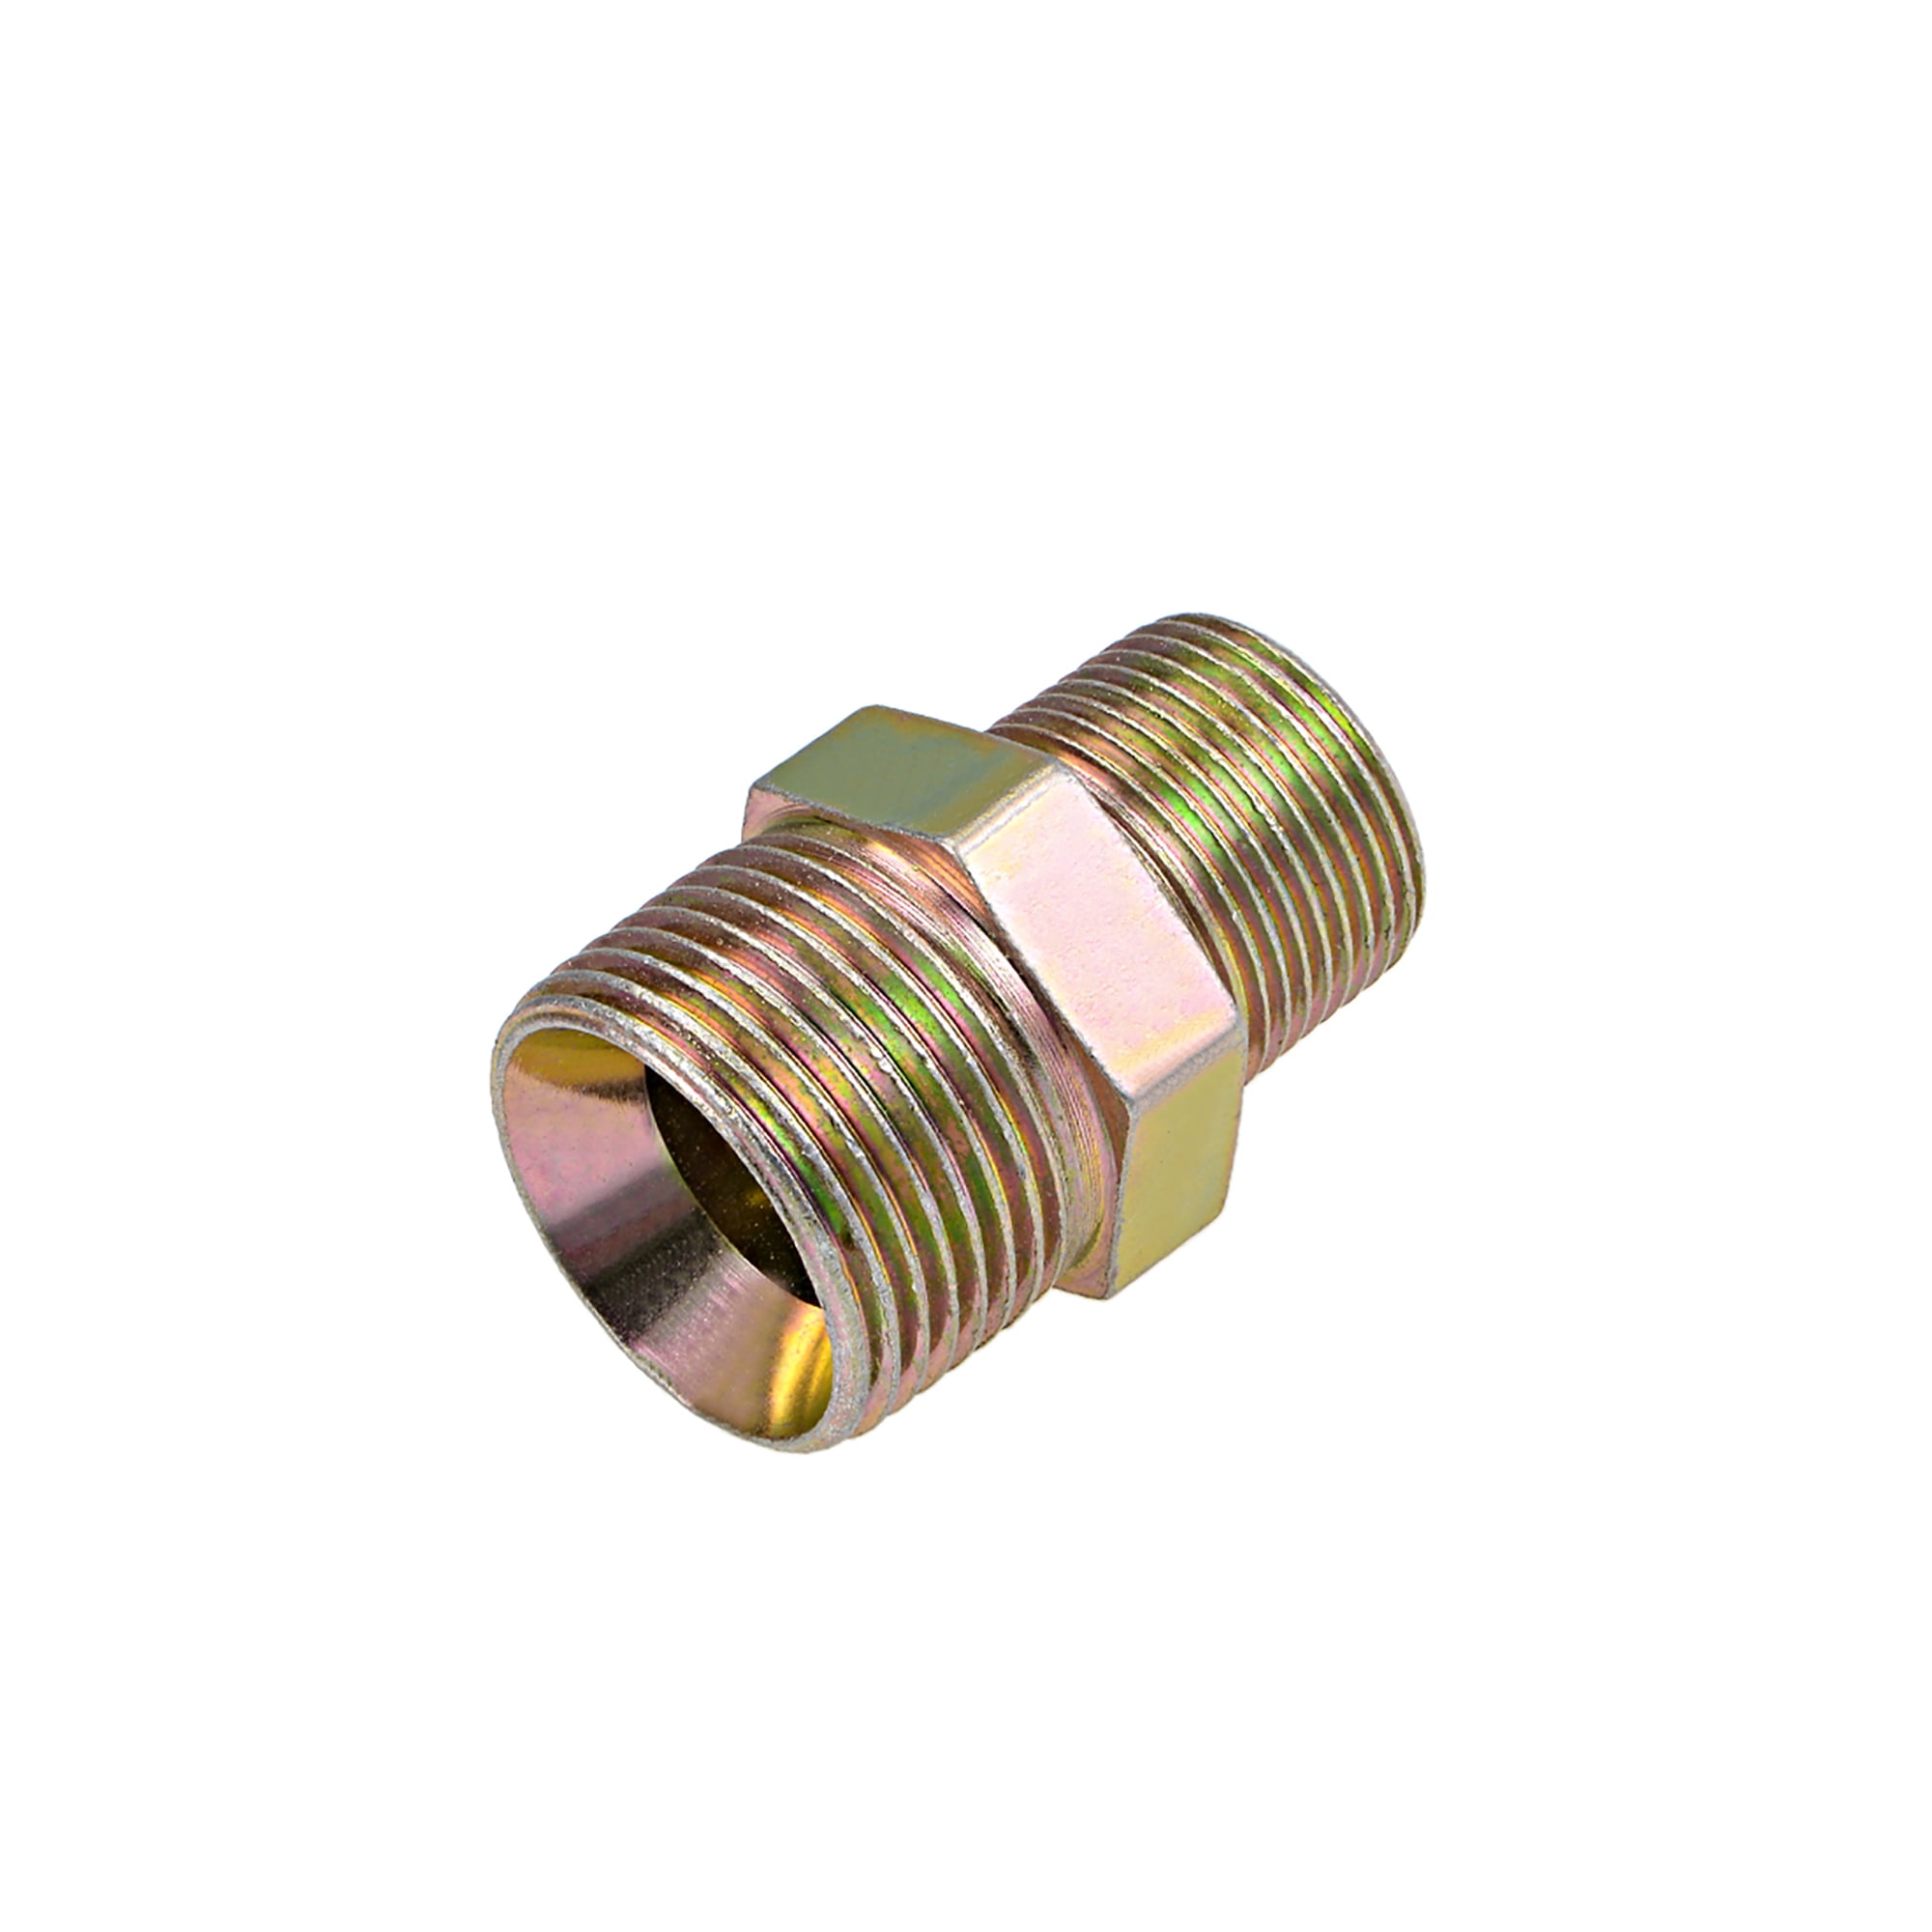 1/8" 1/4" 3/8" NPT Hex Nipple Reduer Brass Pipe Fitting Connector Adapter 